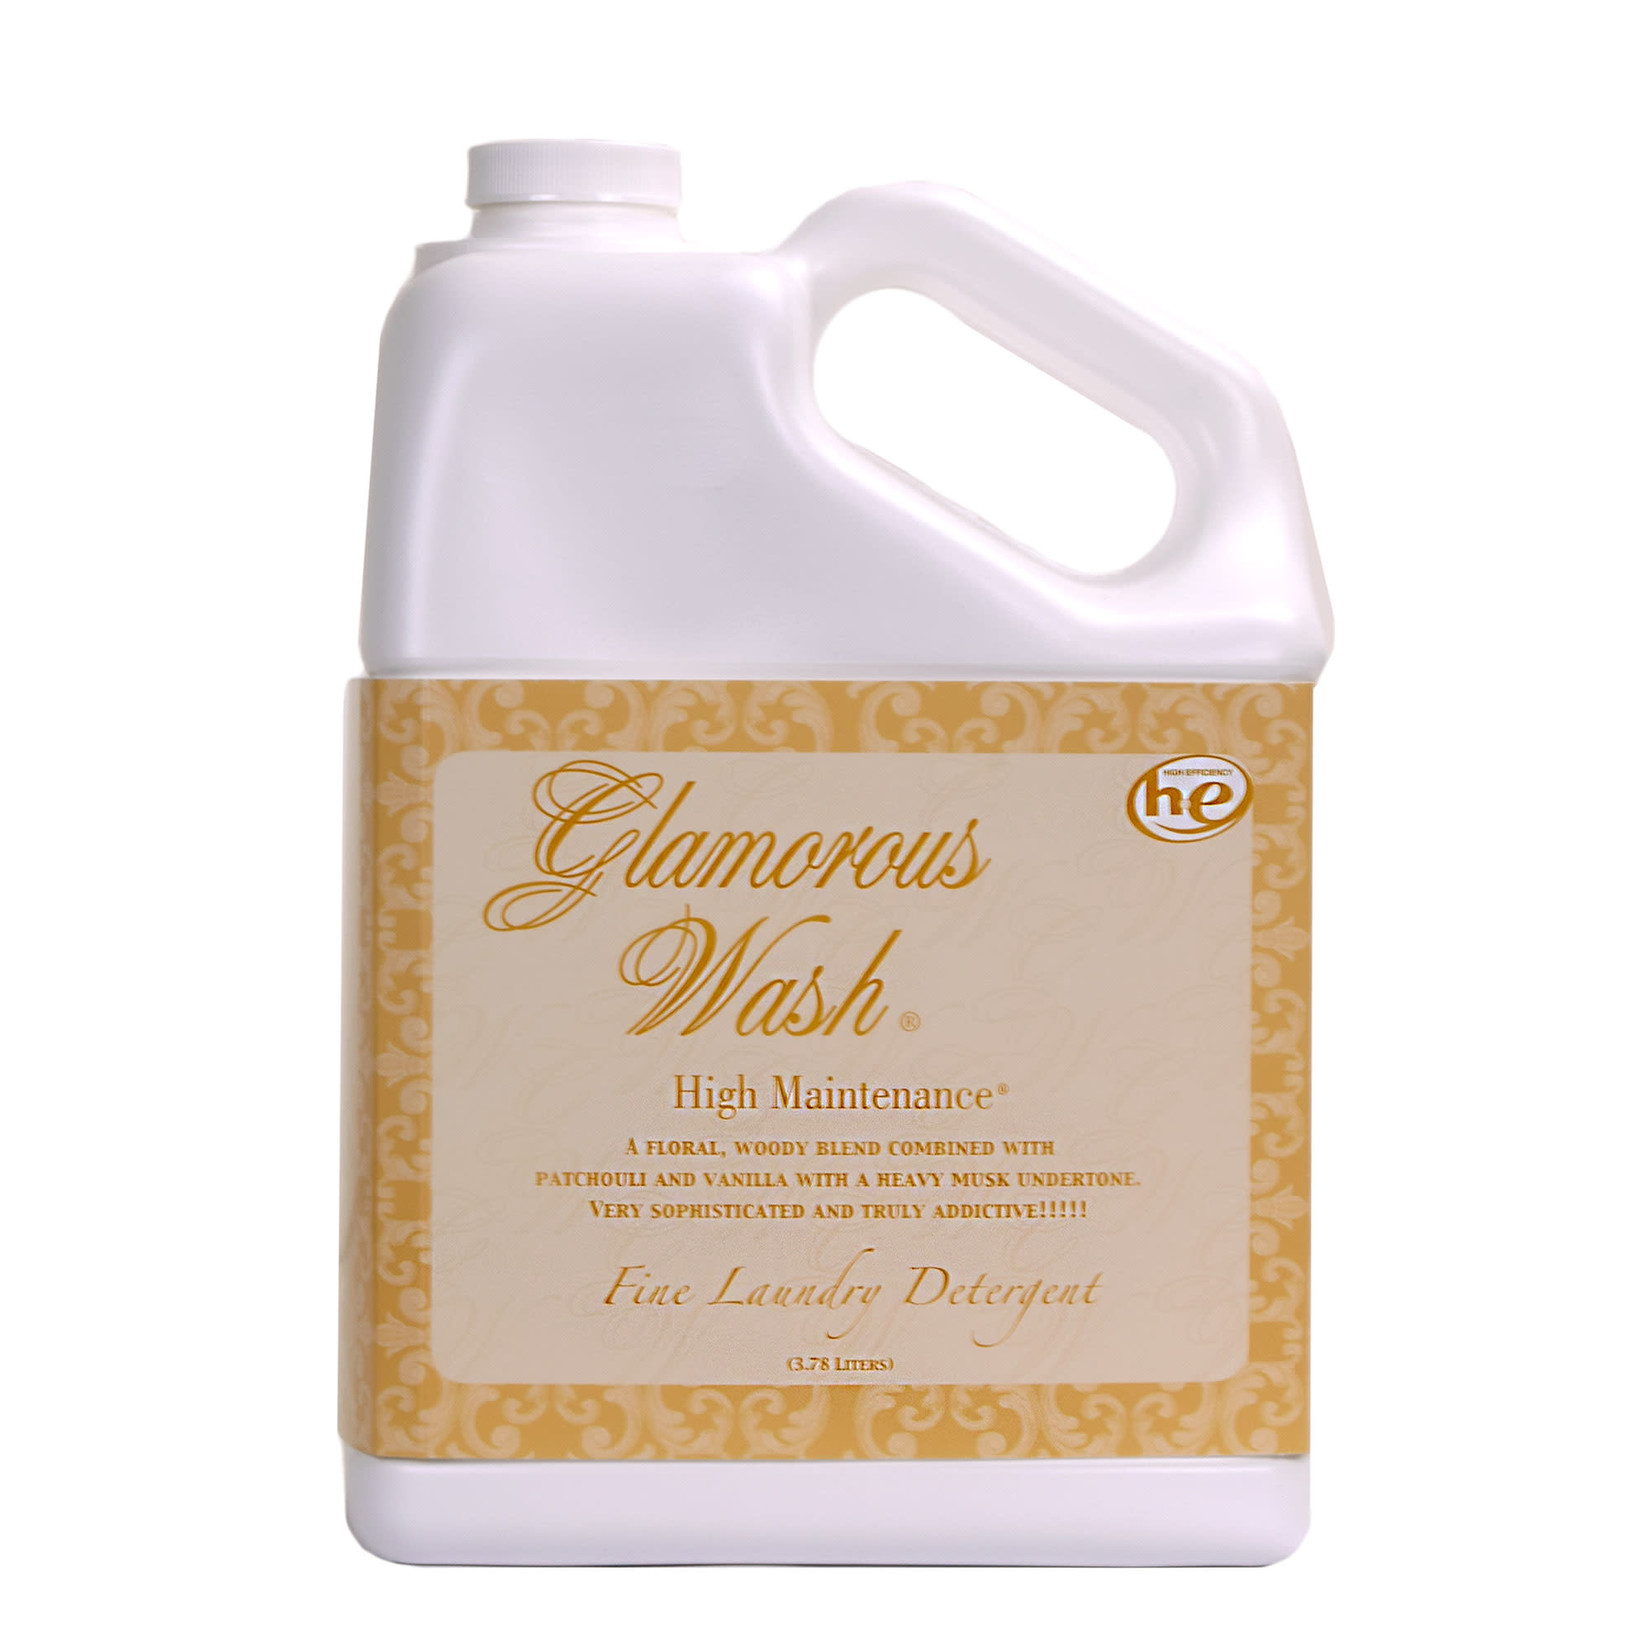 Tyler Candle Company Glamorous Wash Fine Laundry Detergent 112 Grams